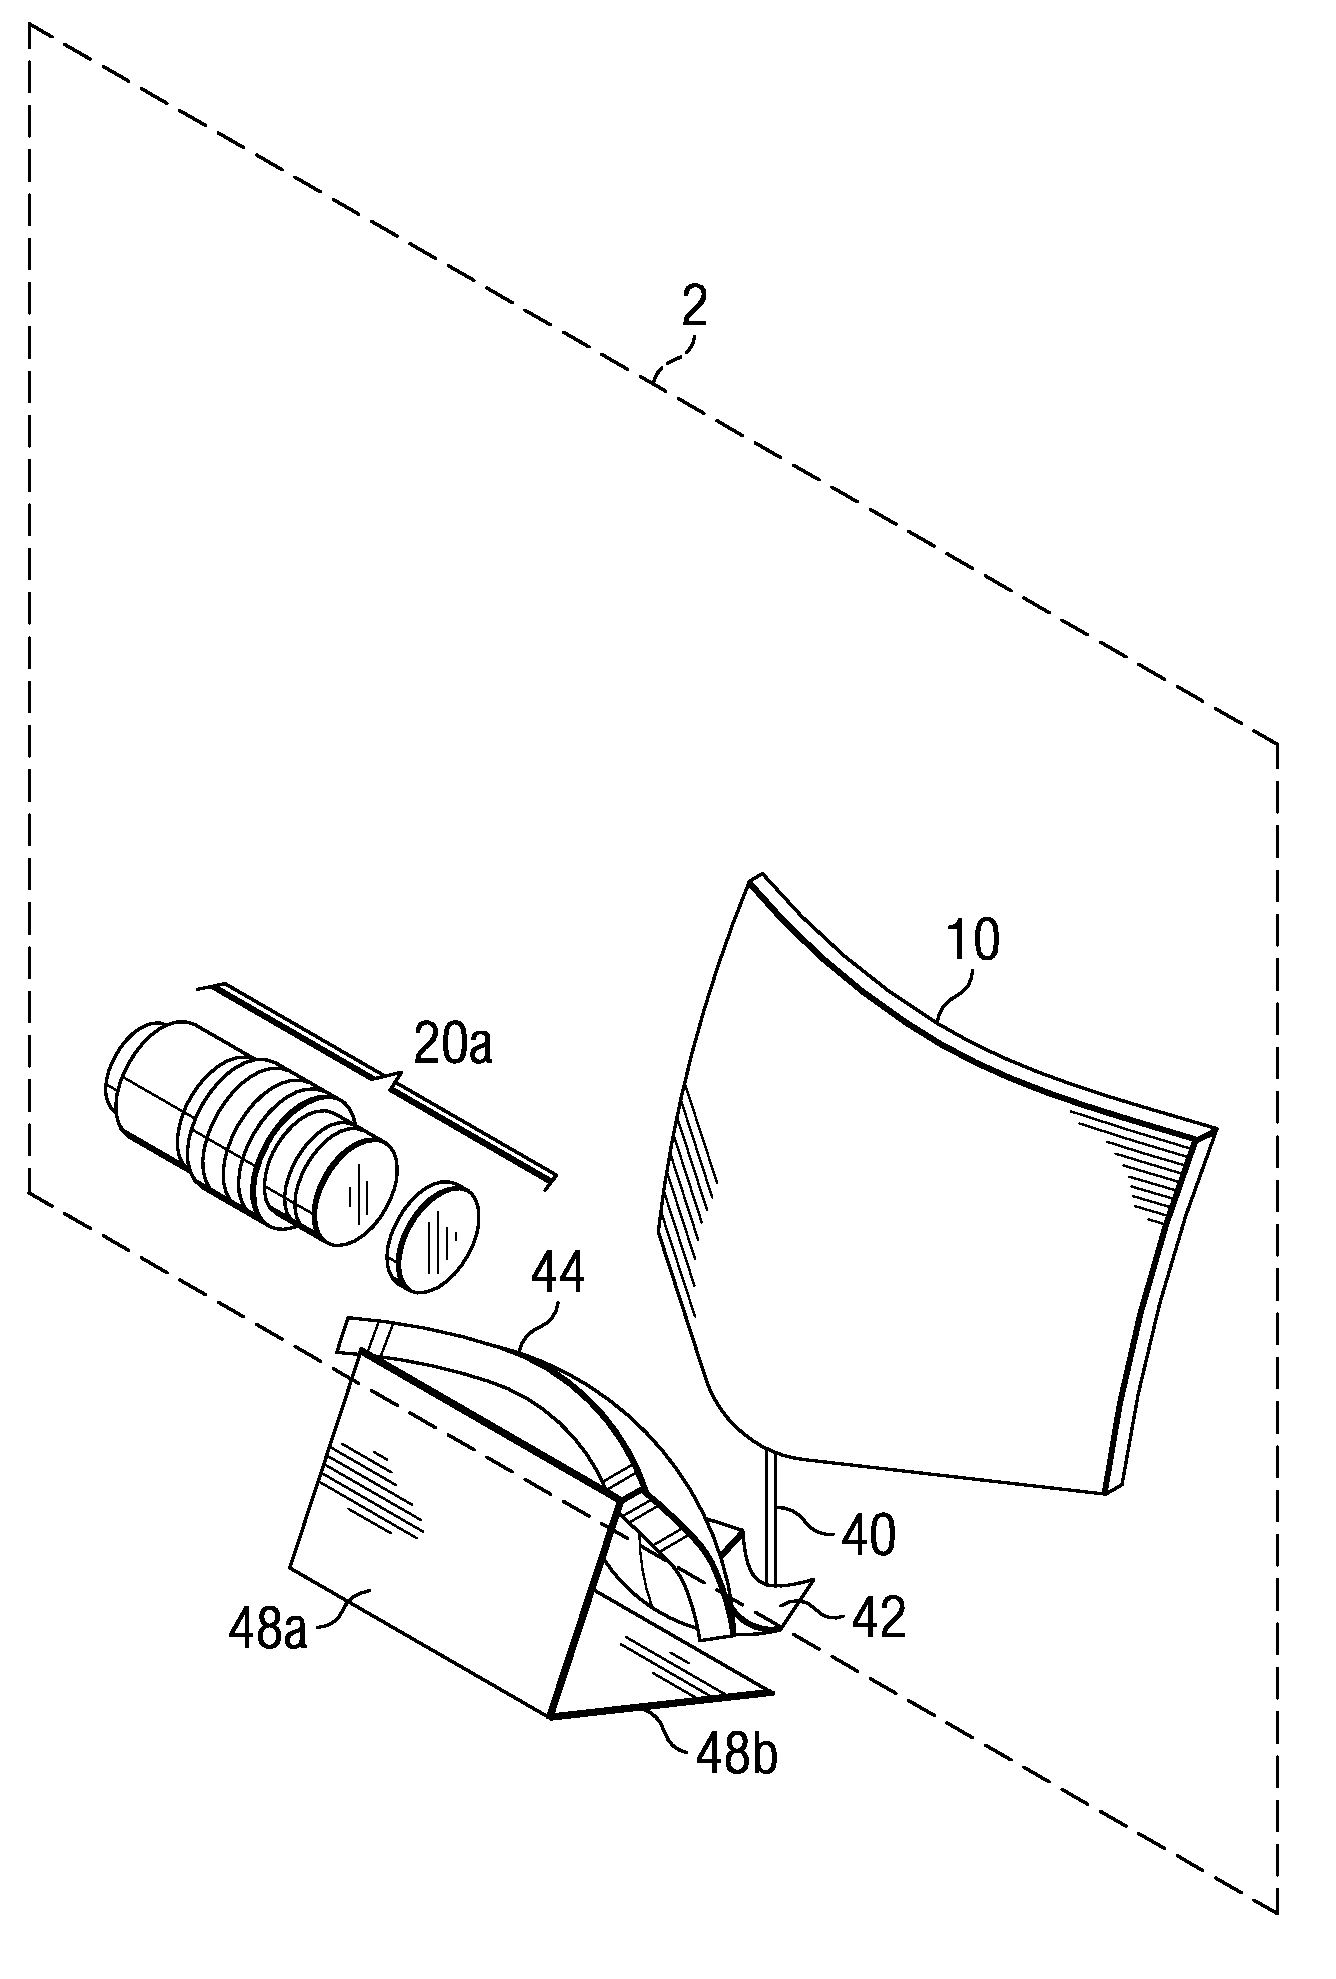 Optical system for a thin, low-chin, projection television